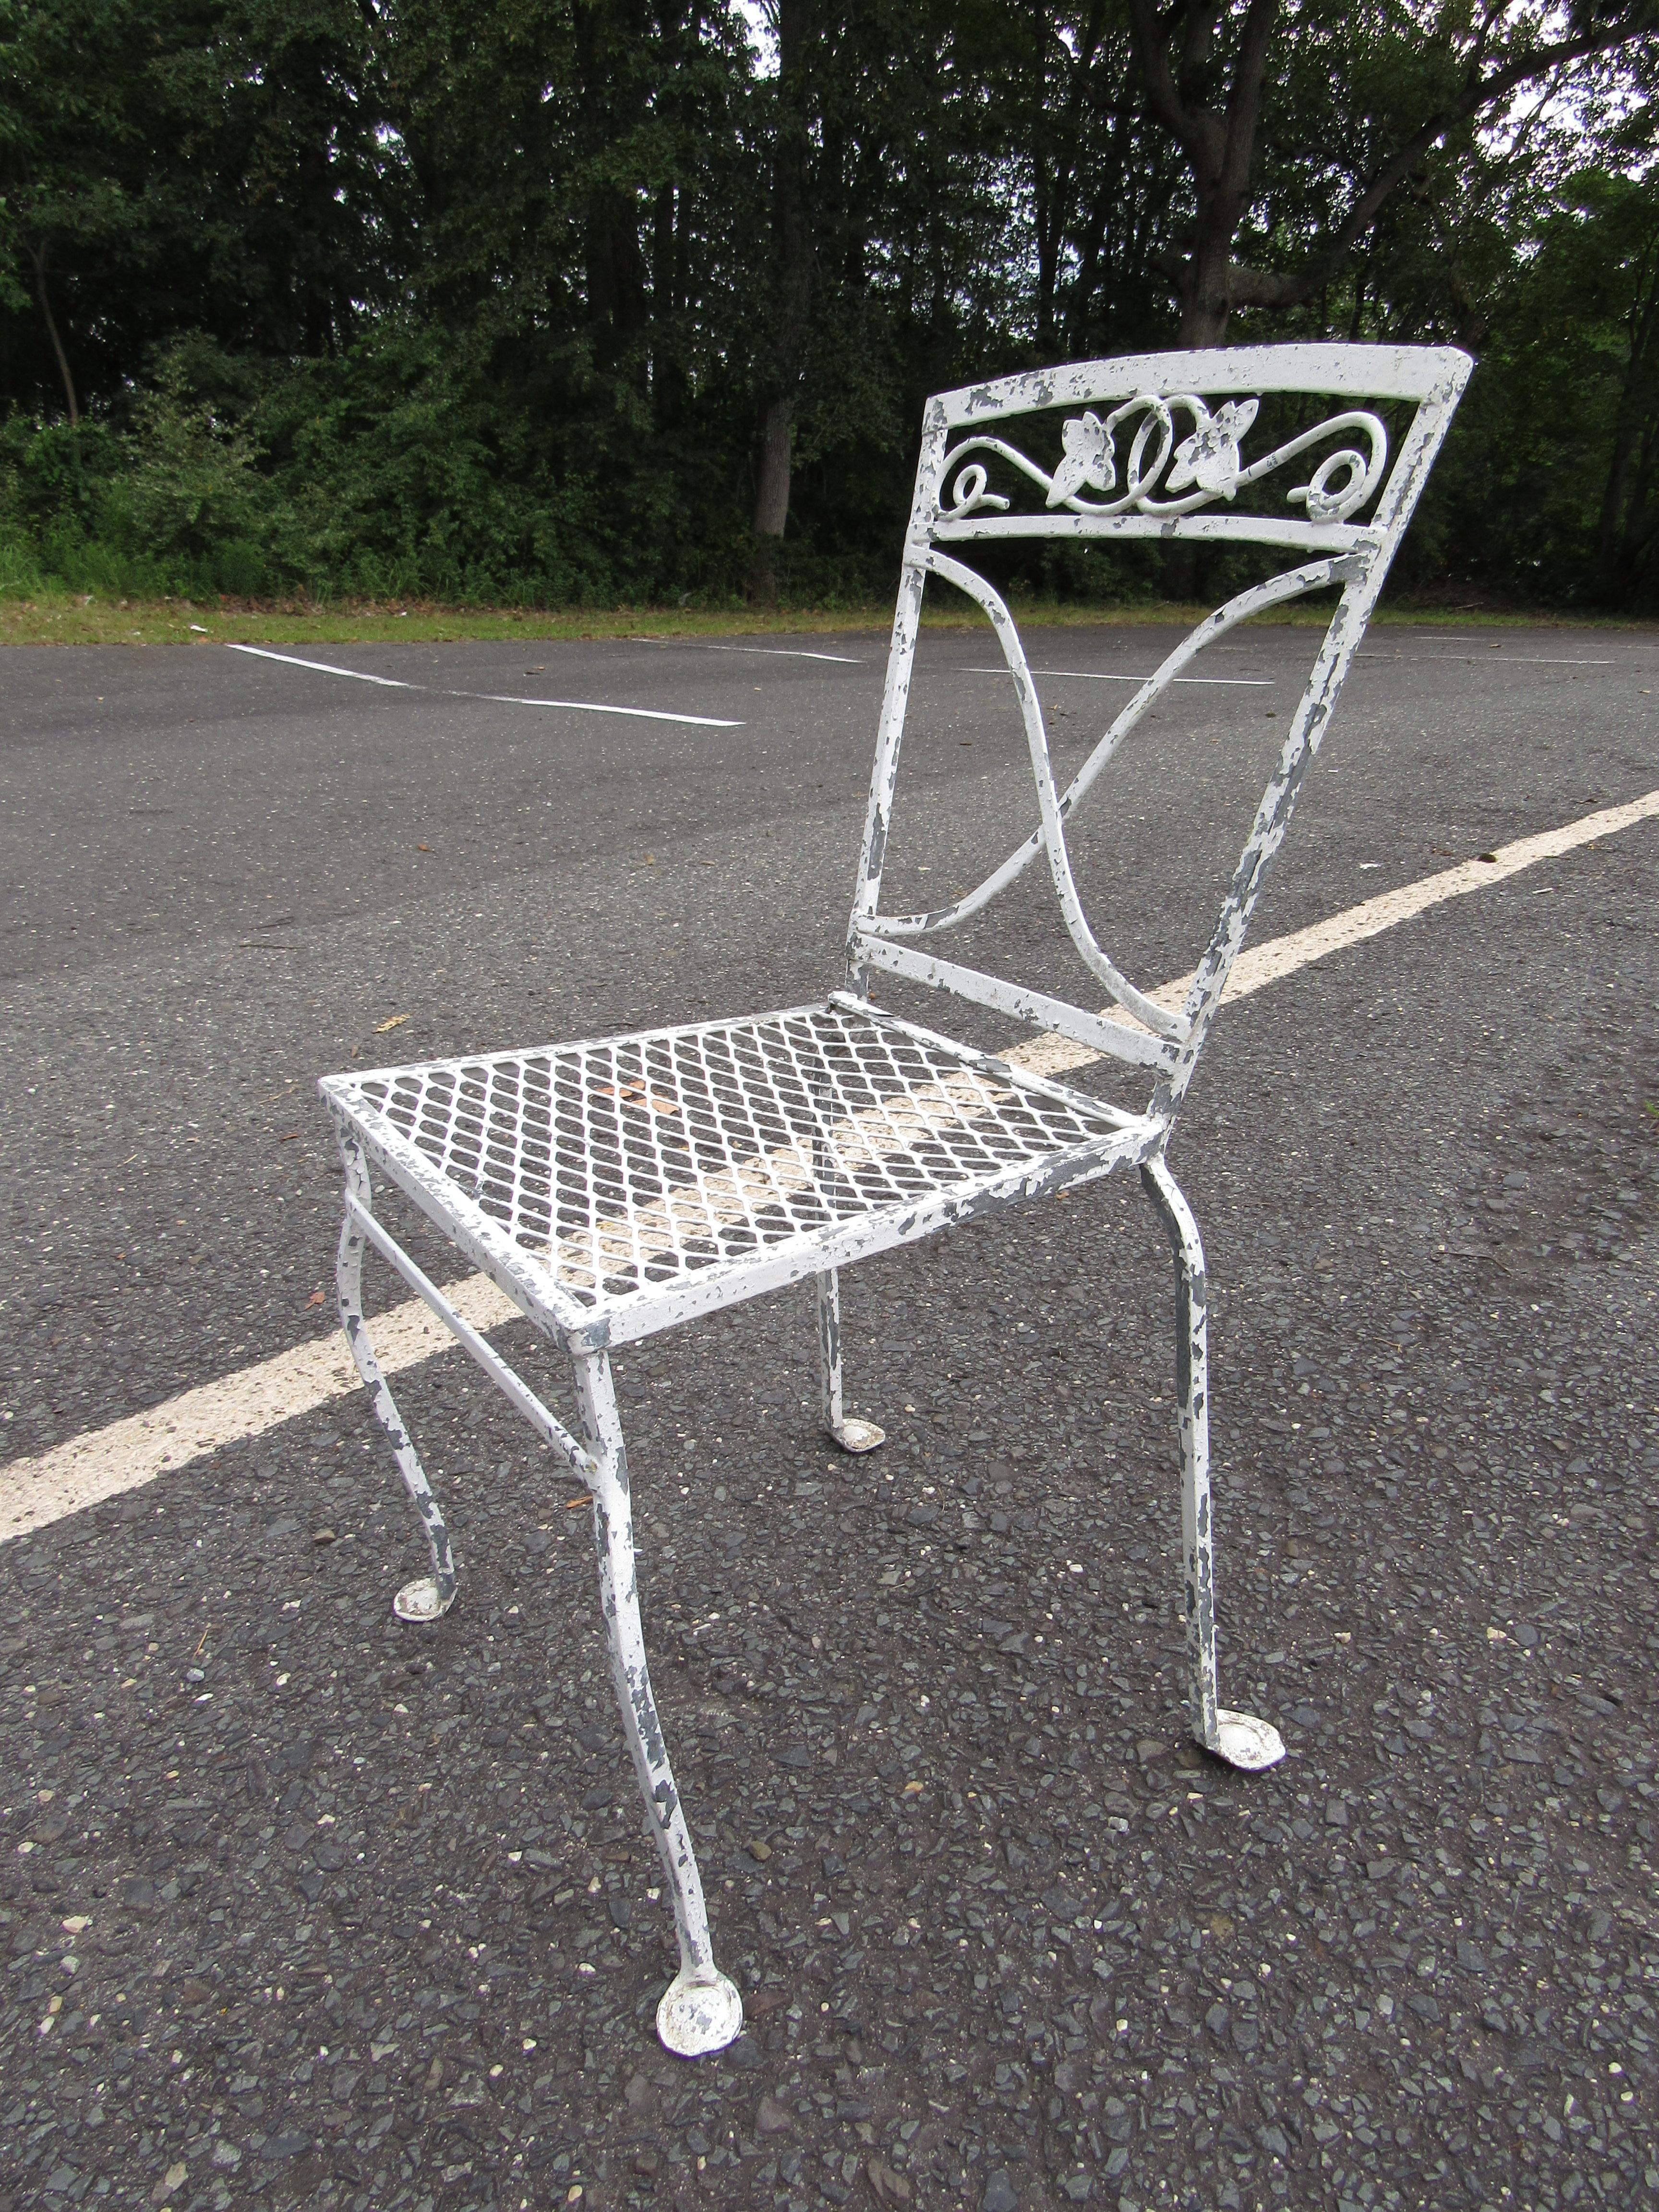 Impressive set of vintage patio dining chairs. Sturdy iron construction. Great addition to any outdoor/patio area's seating arrangement. Please confirm item location with dealer (NJ or NY).